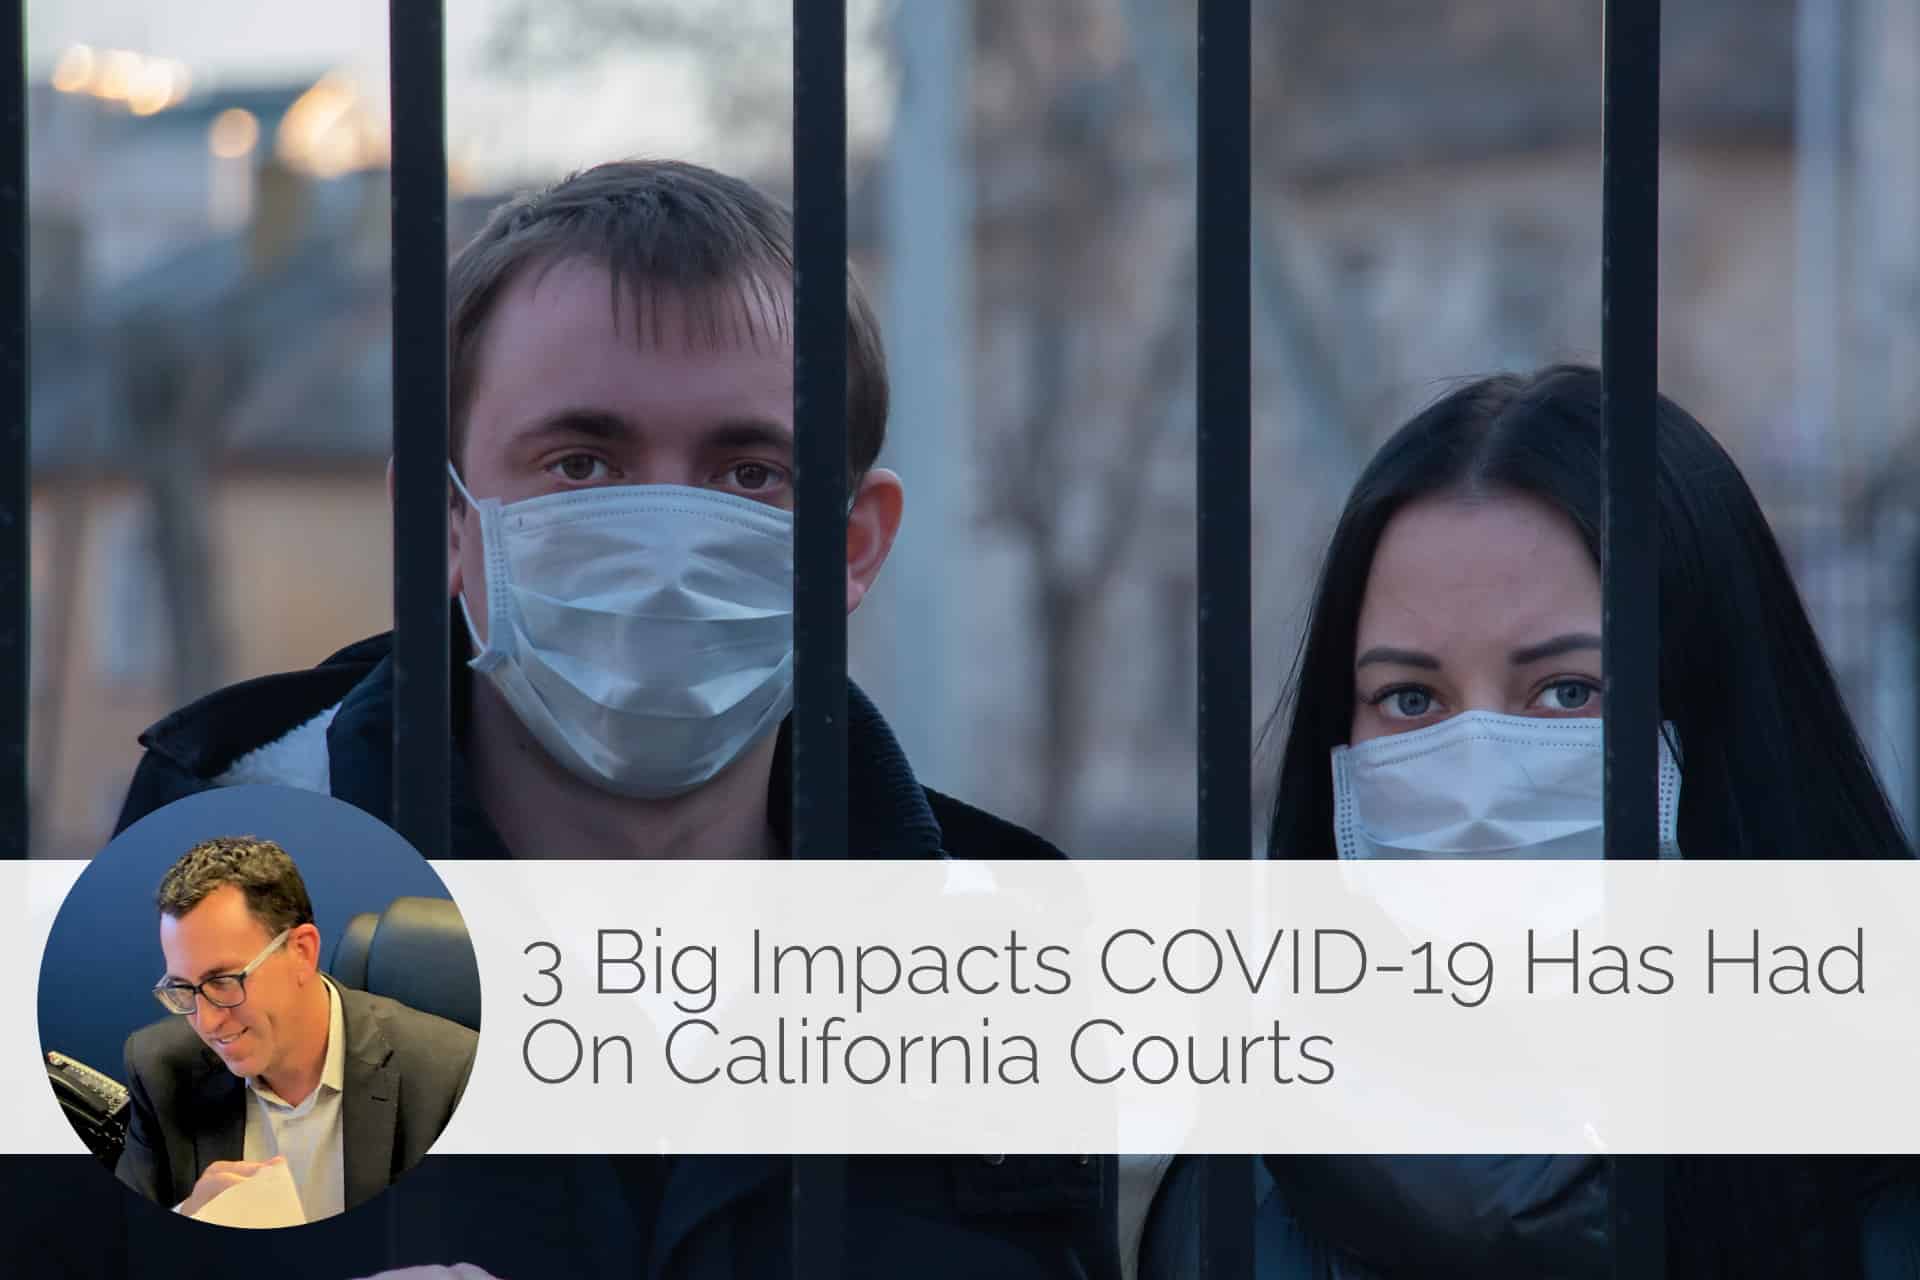 Impacts COVID-19 has had on California Courts